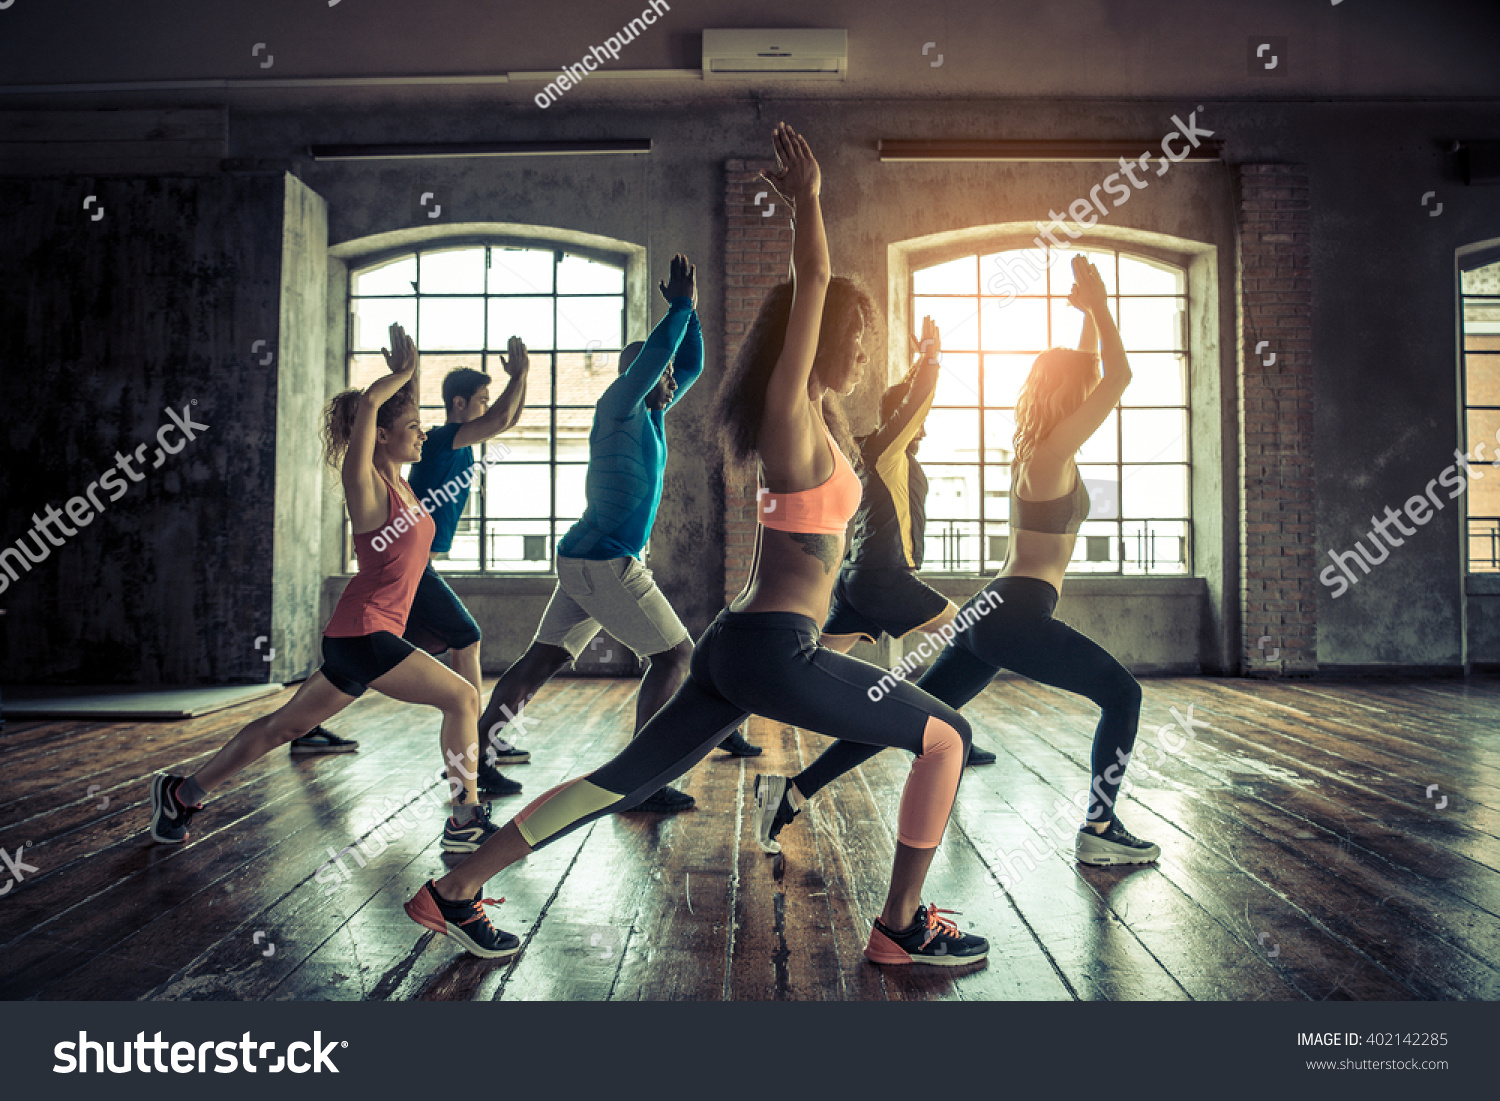 Group of sportive people in a gym training - Multiracial group of athletes stretching before starting a workout session #402142285